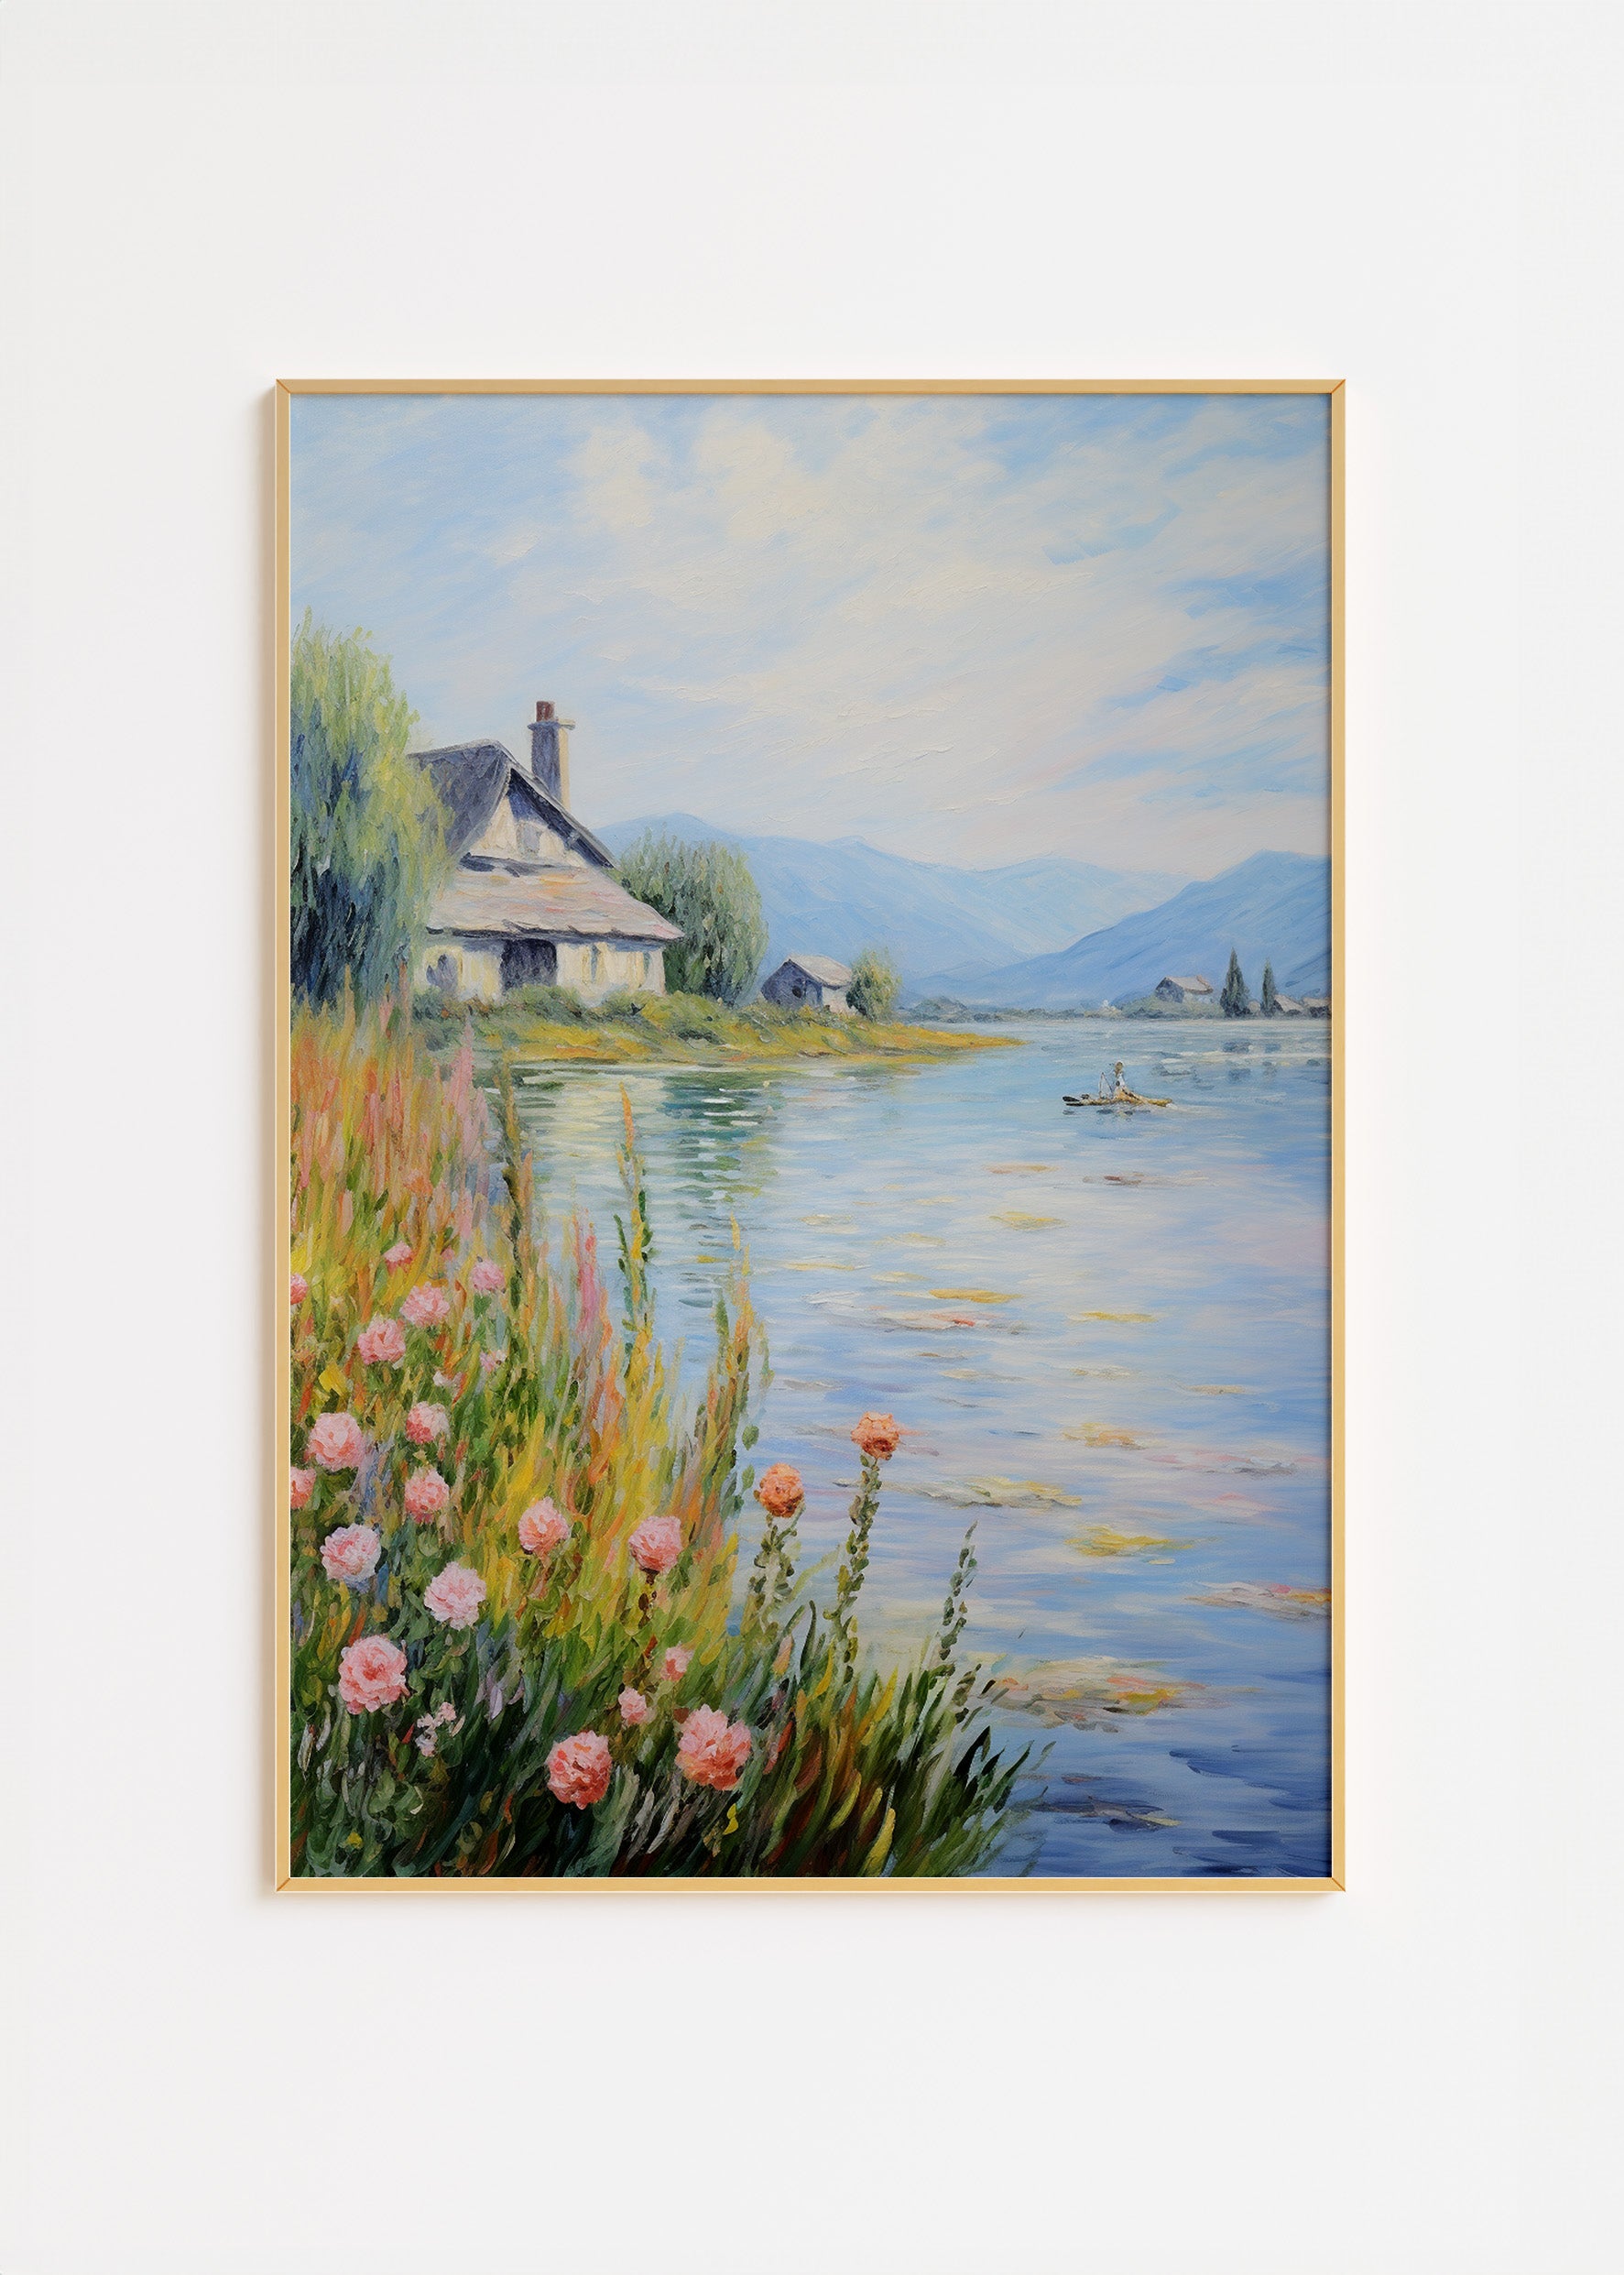 A framed painting depicting a serene landscape with a cottage by a river and blooming flowers in the foreground.